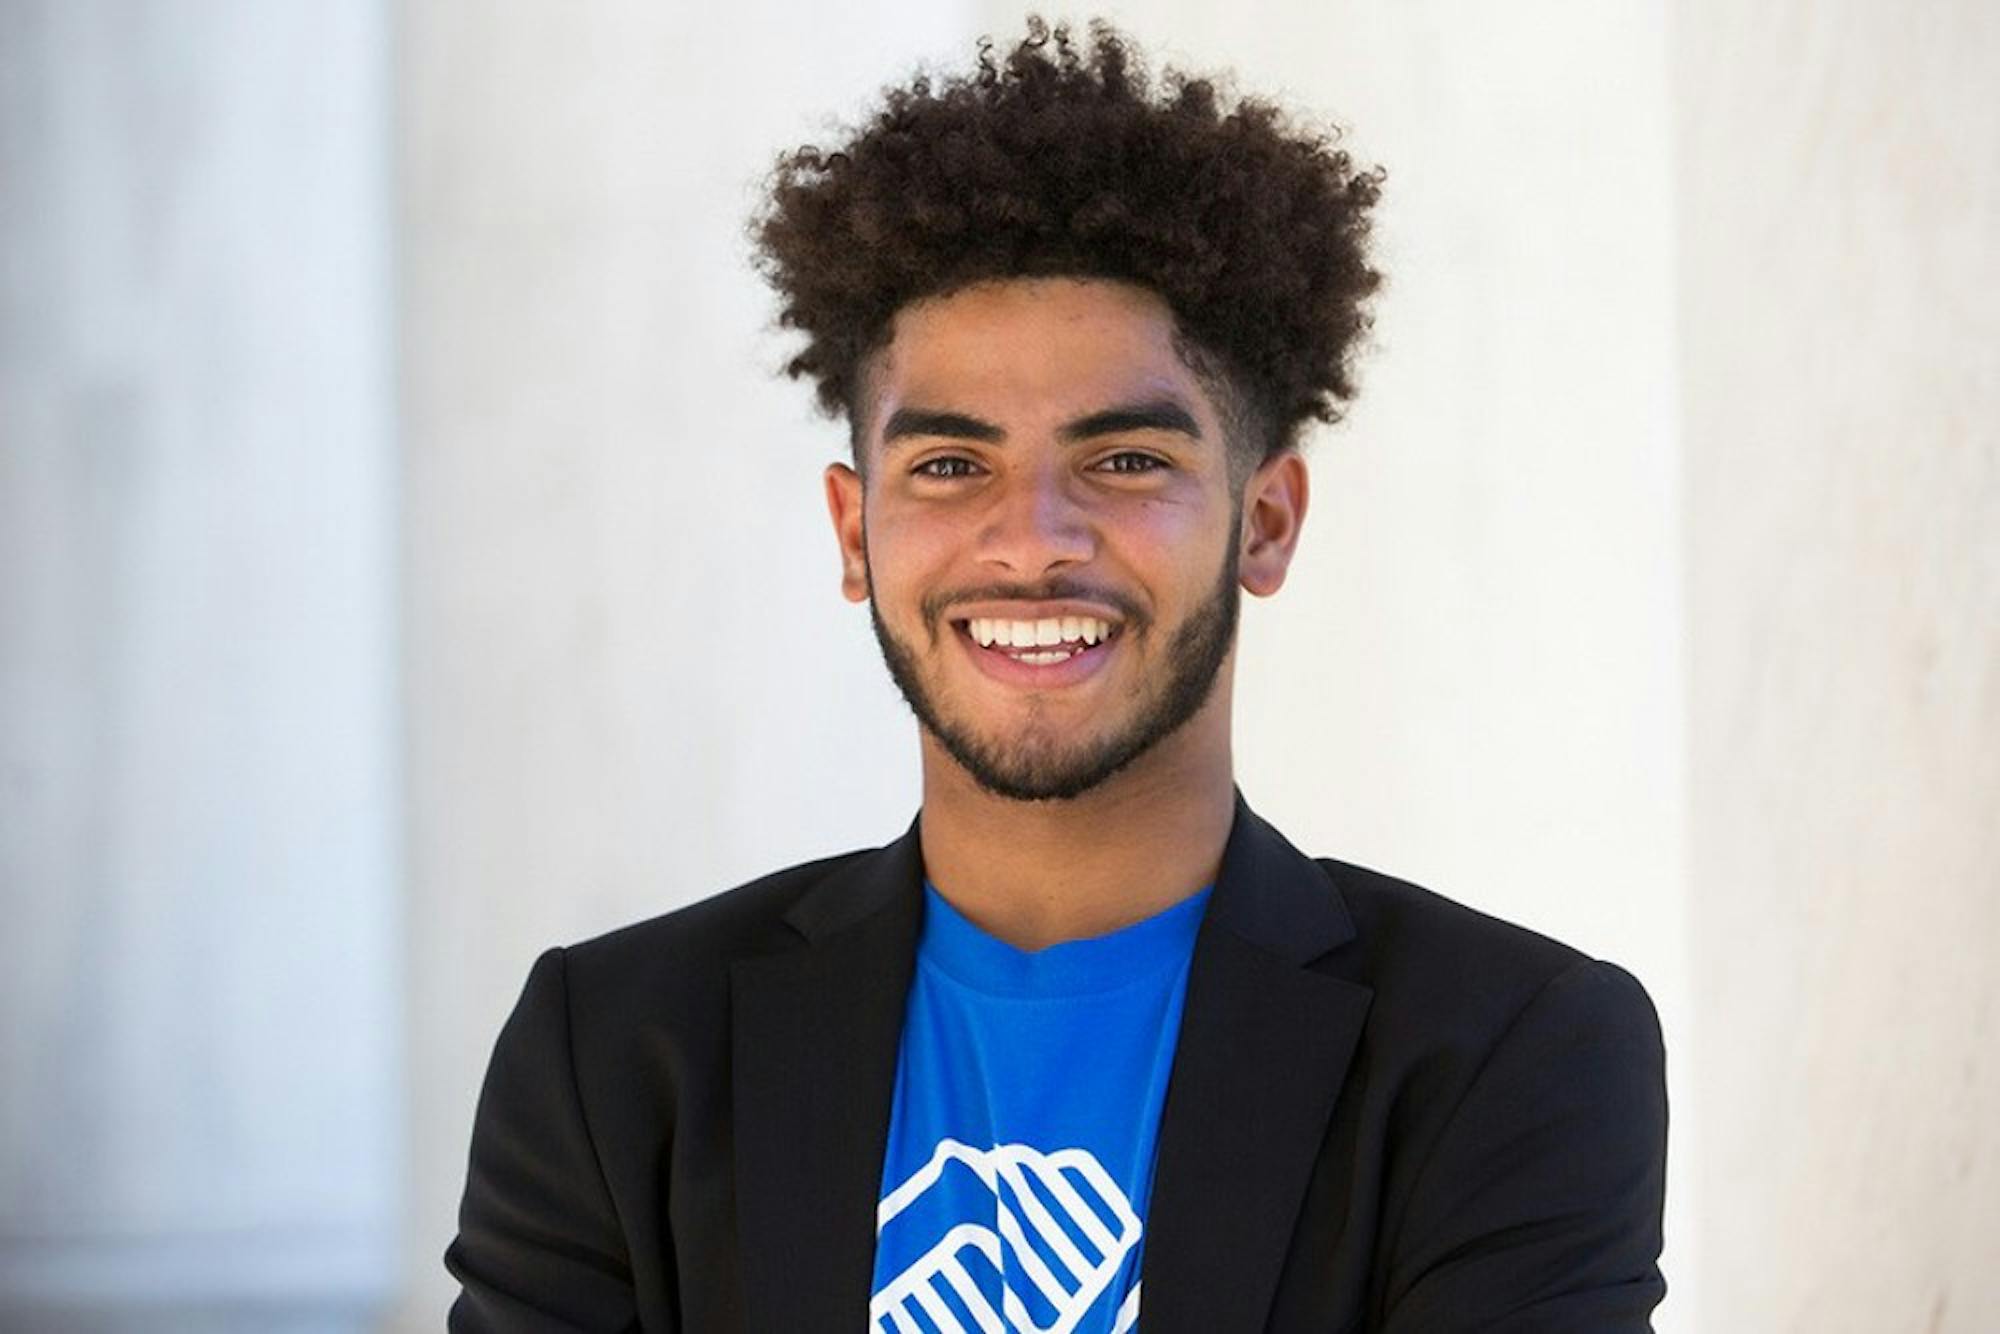 Carlos Polanco '21 was named National Youth of the Year by the Boys and Girls Clubs, out of six finalists.